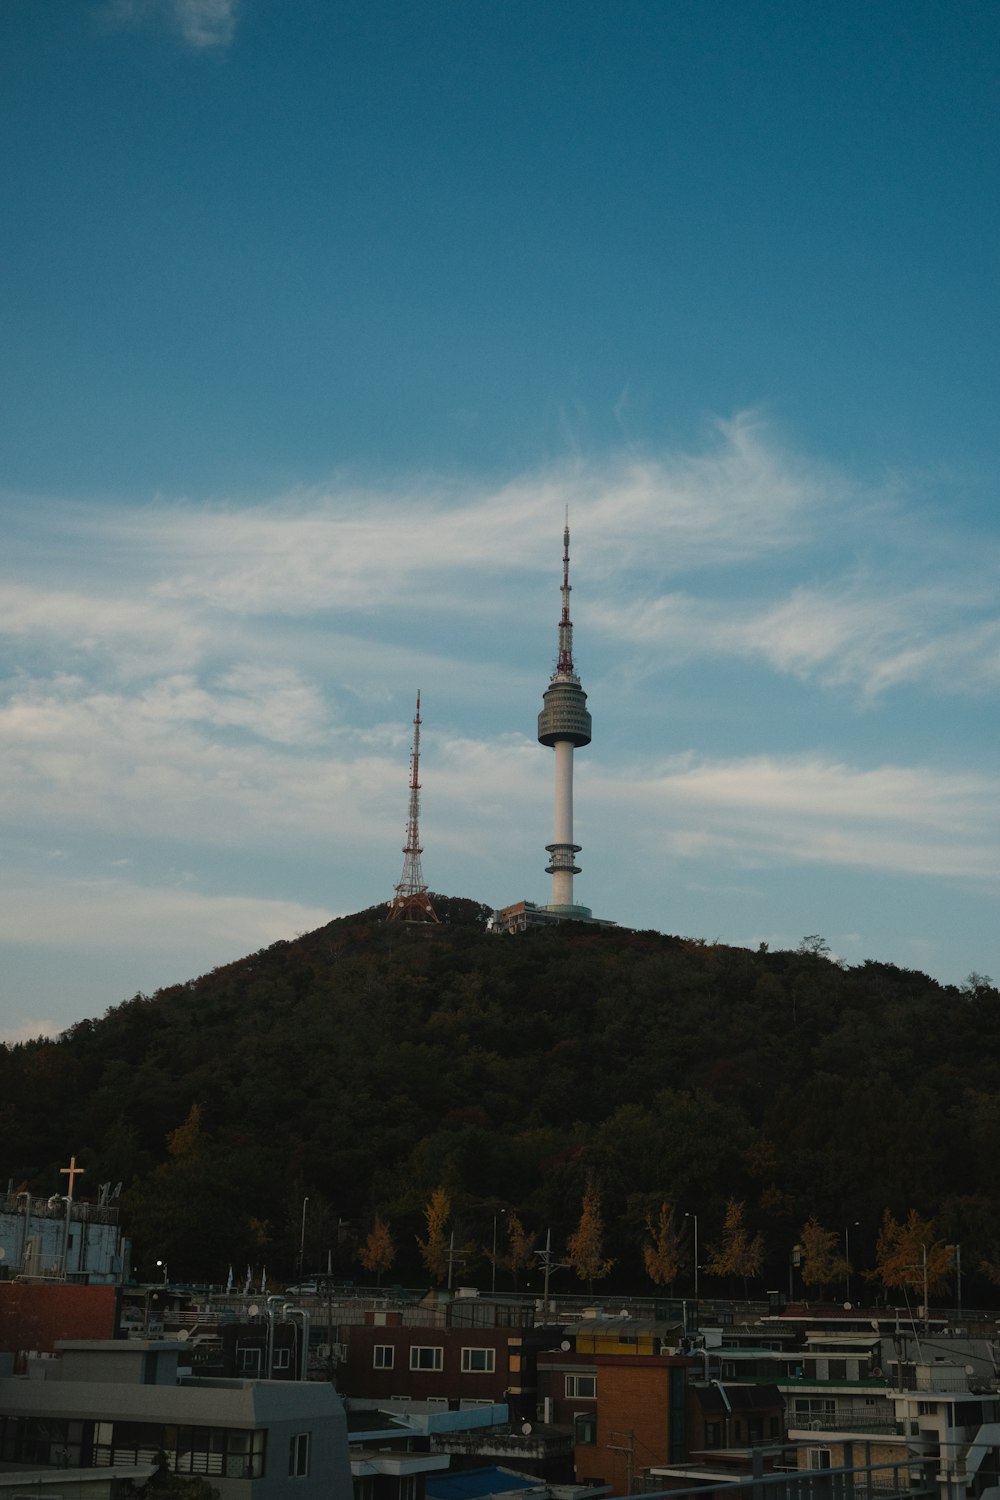 a tall tower on a hill